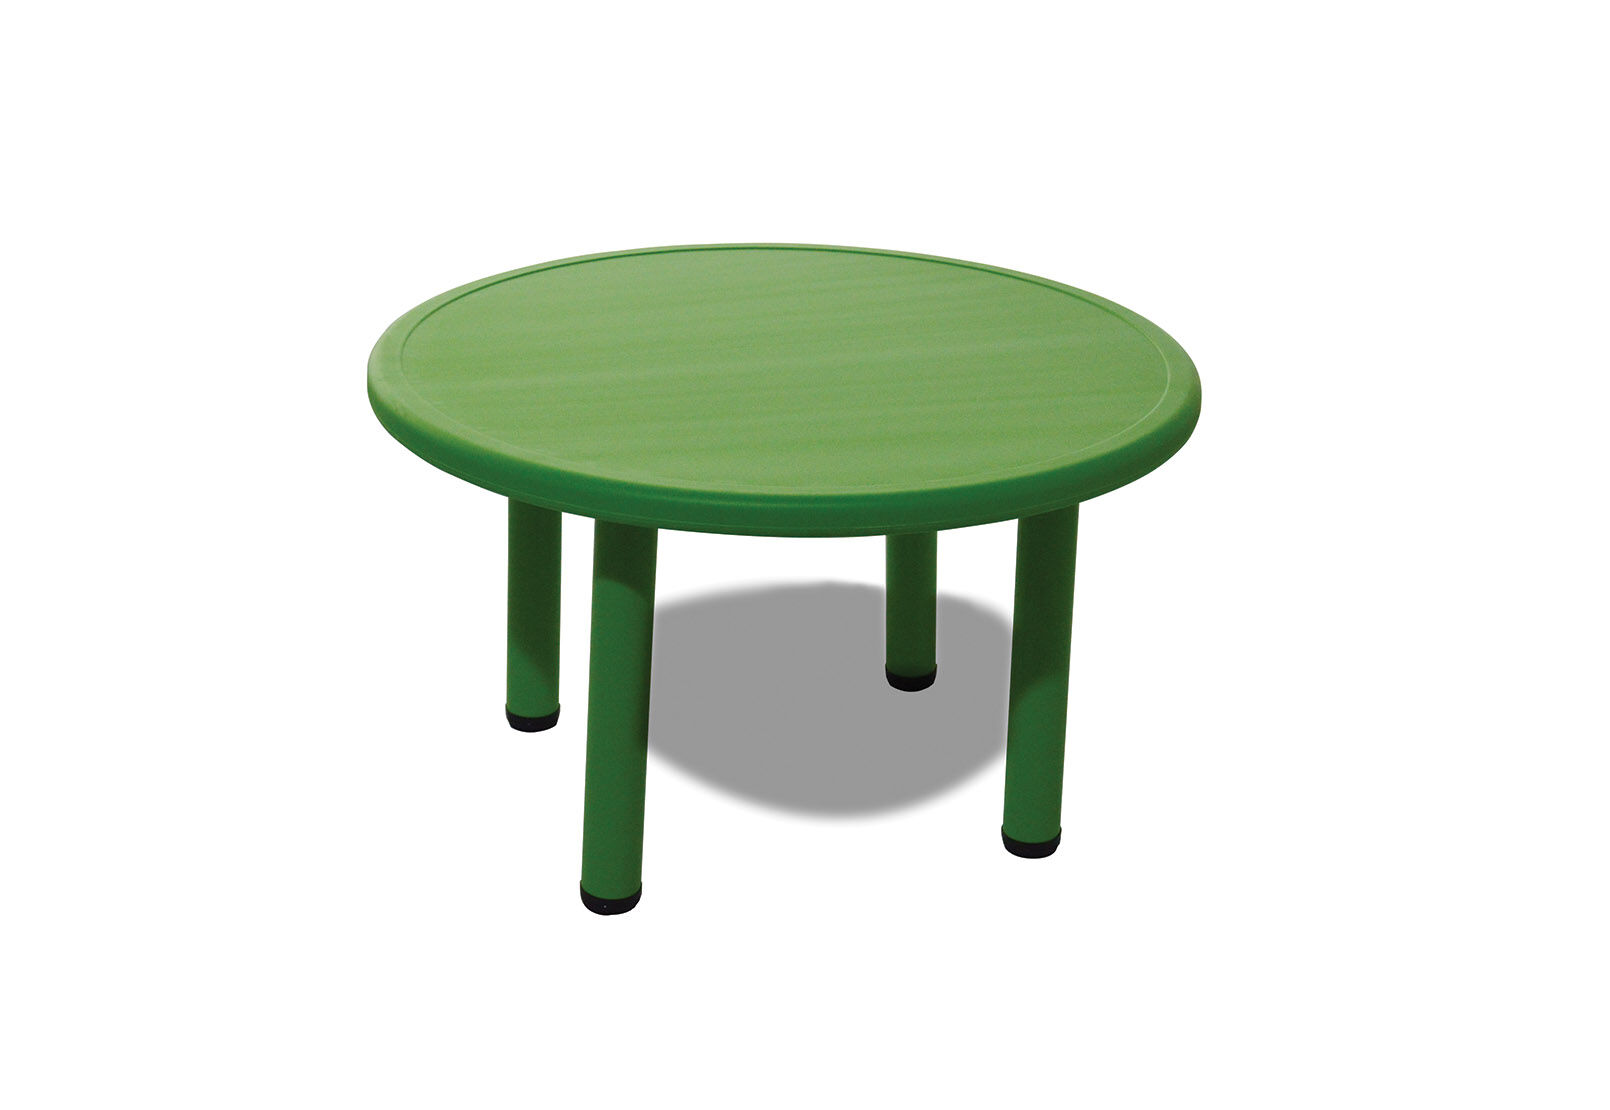 childrens table and chairs amart